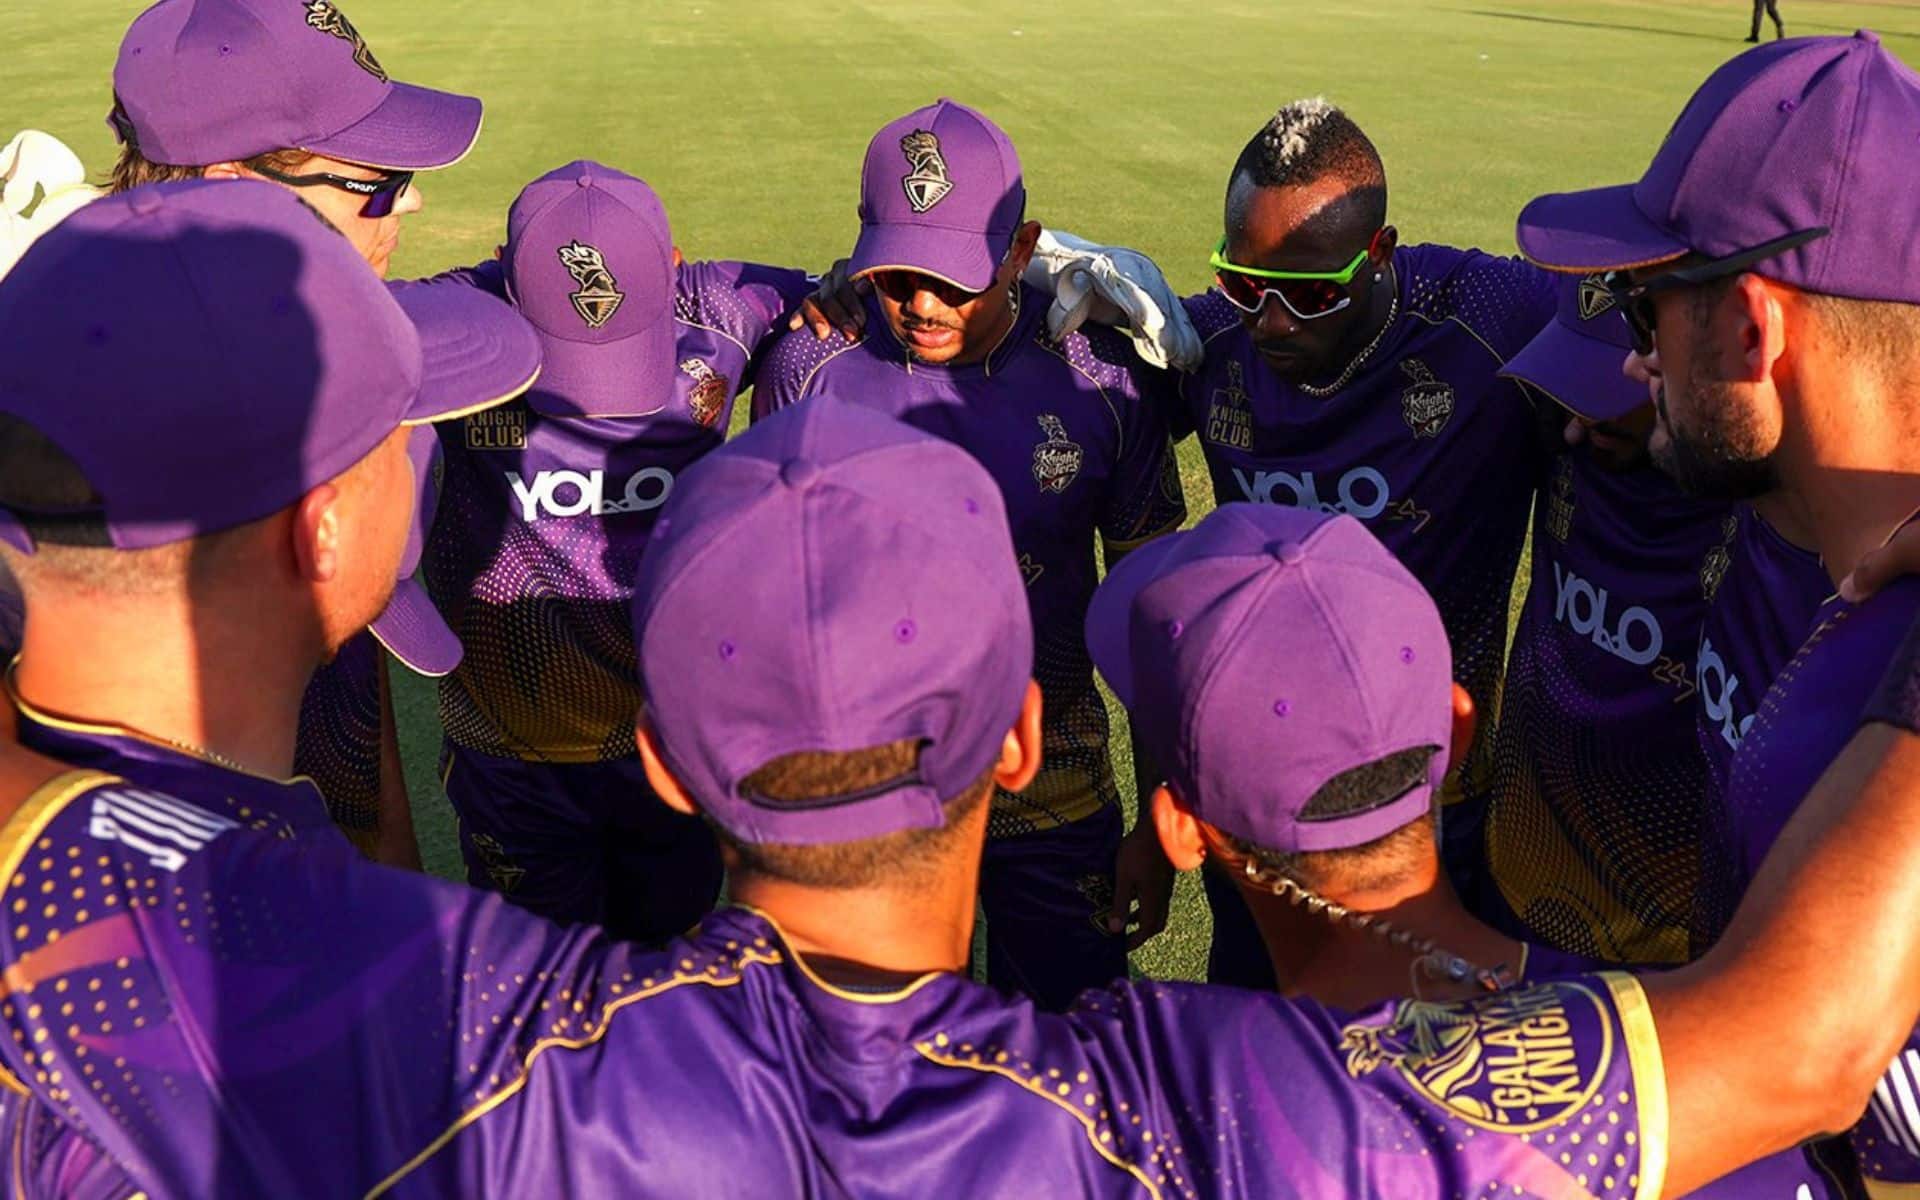 Experience And Depth In Team But Volatile Top Order - Analysis Of Los Angeles Knight Riders